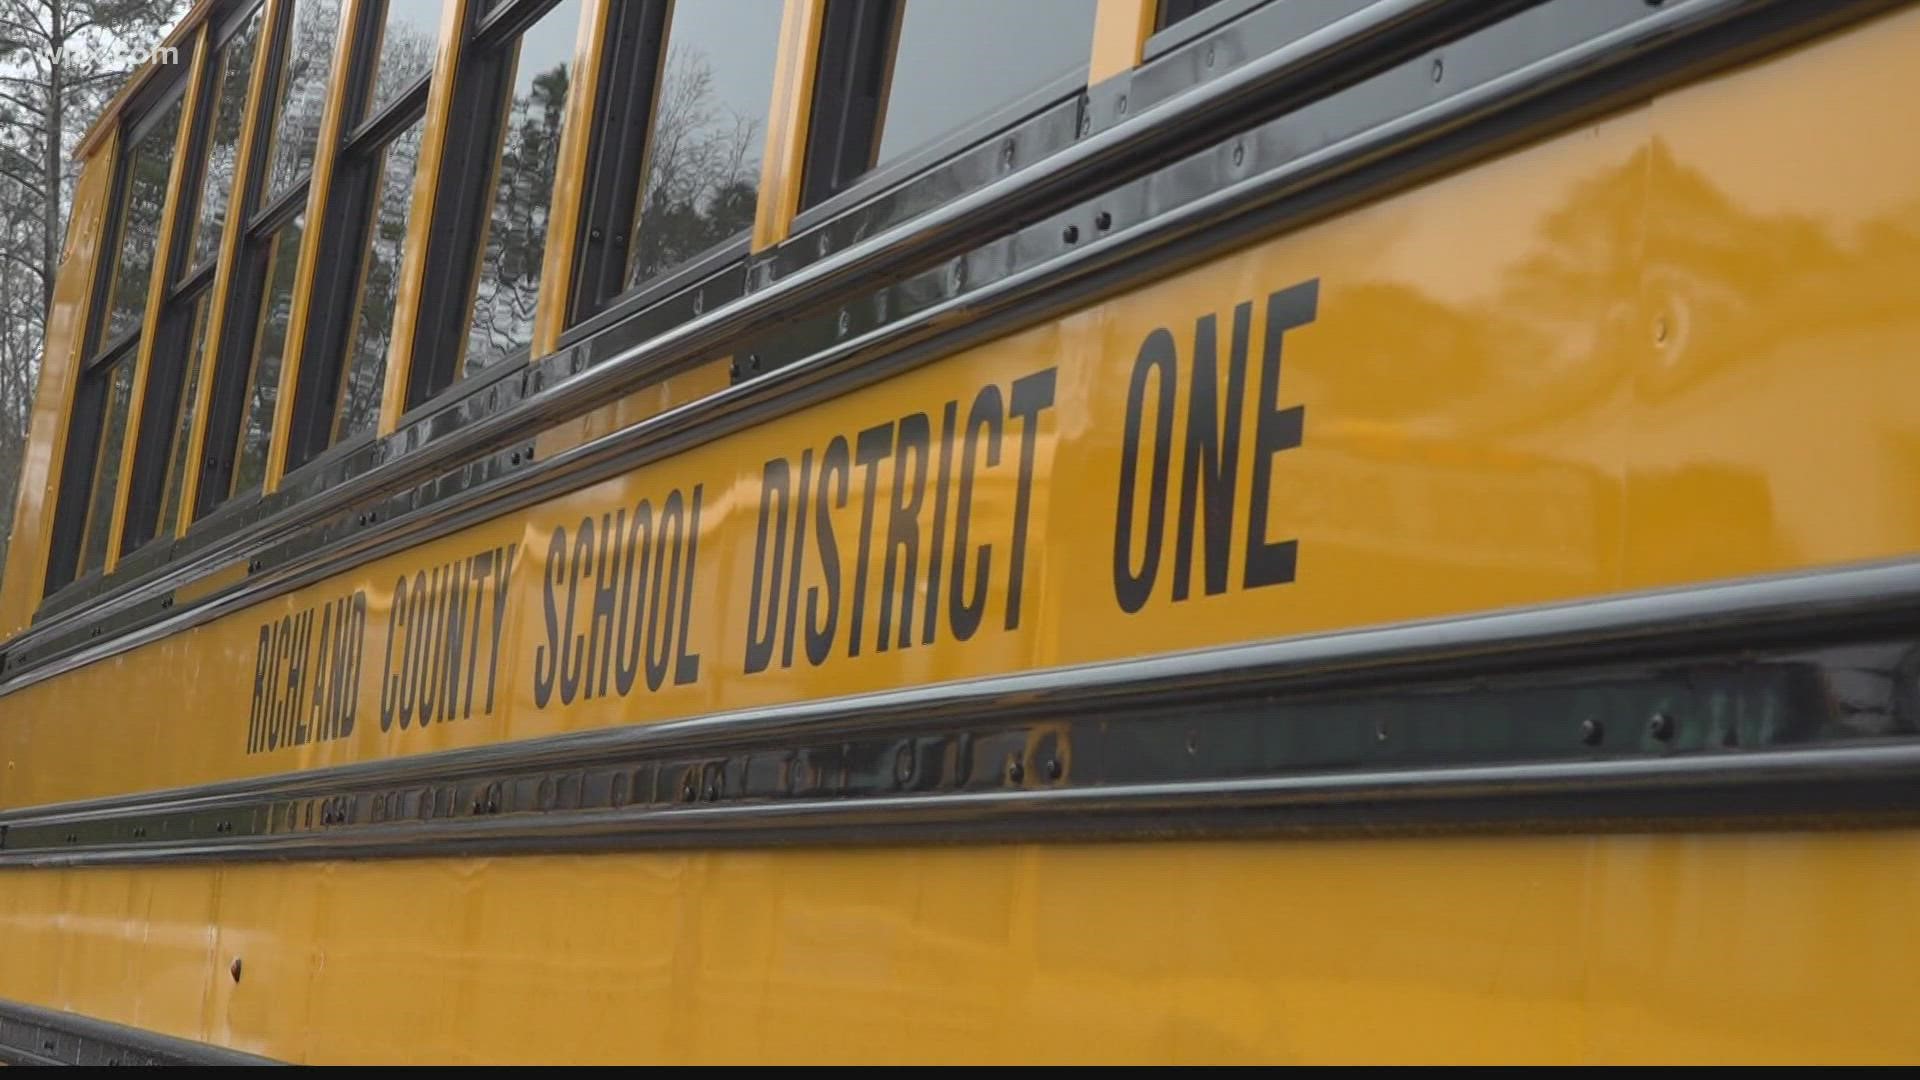 Richland County School District One has a new electric school bus, thanks, in part, to student essays in the "Kids Ride Clean" writing contest.